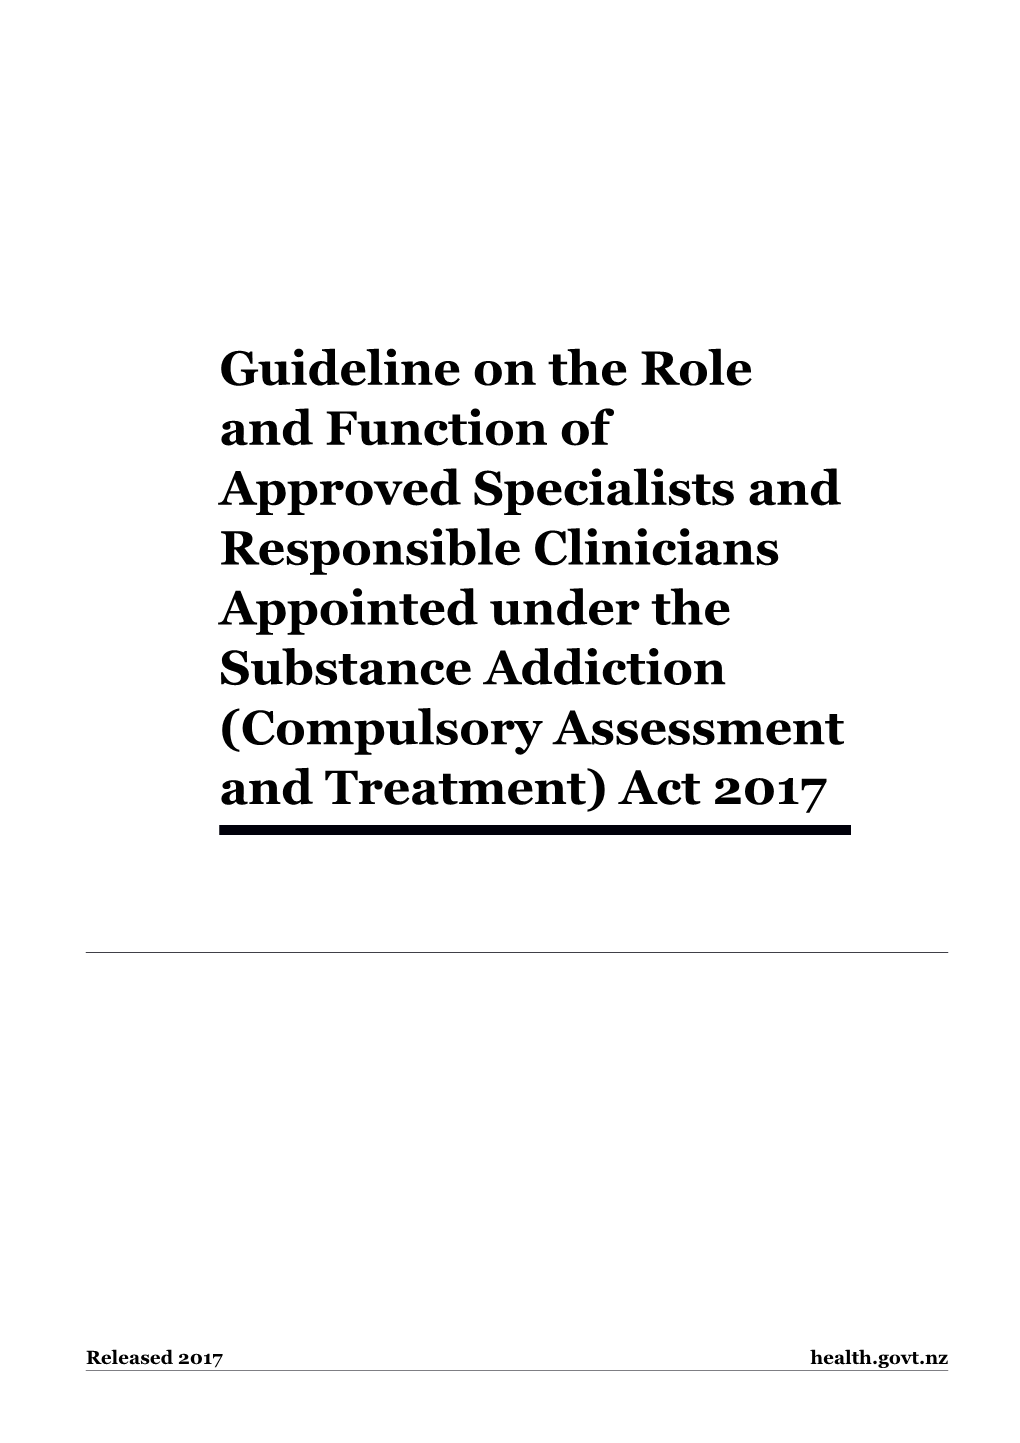 Guideline on the Role and Function of Approved Specialists and Responsible Clinicians Appointed